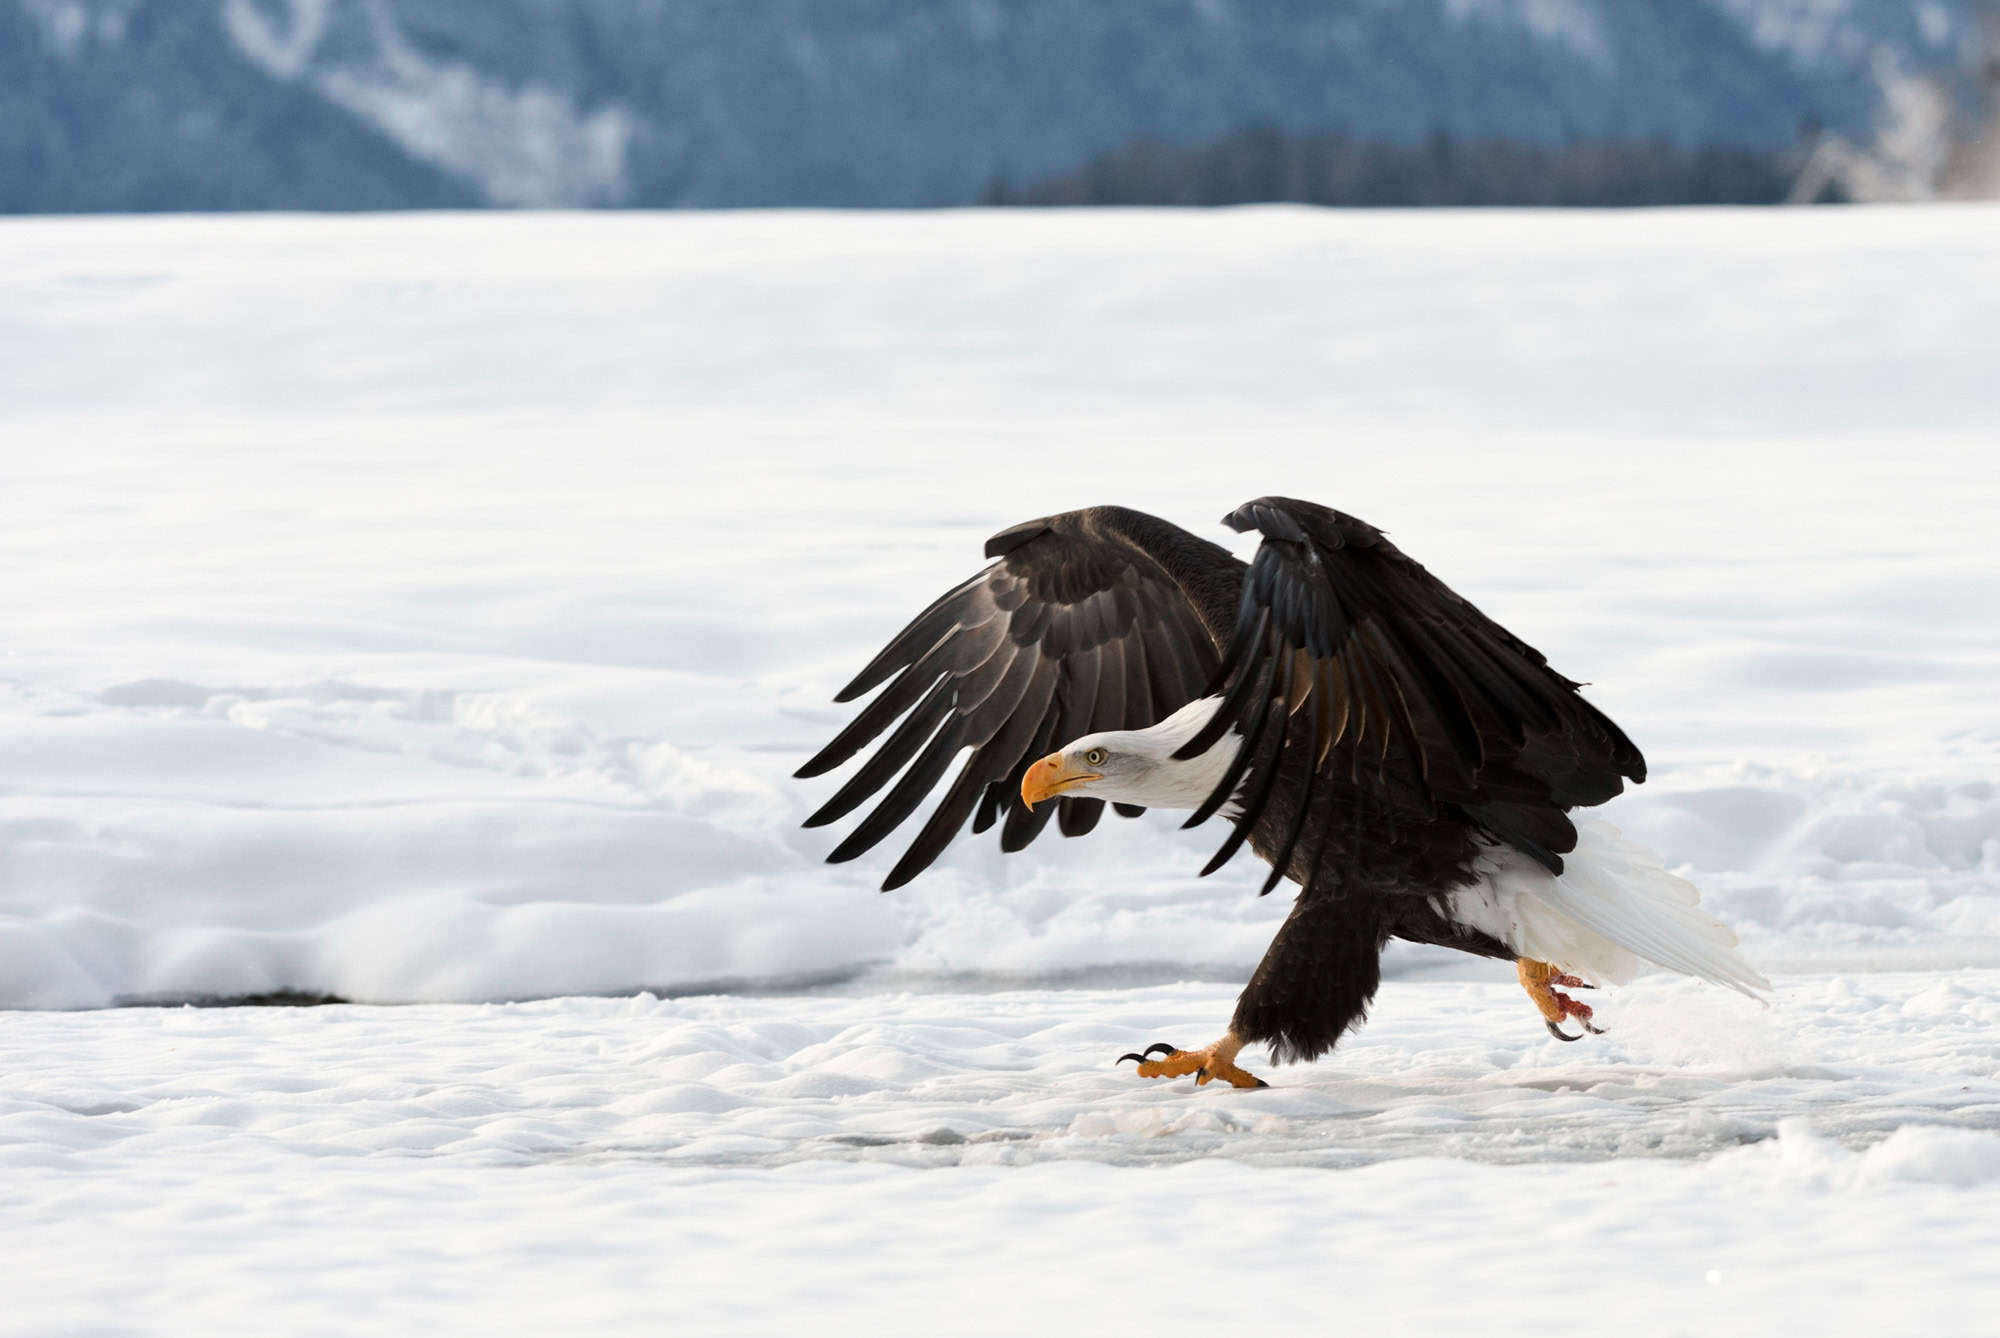 <p>Imagine a place so teeming with bald eagles that it makes America’s national emblem seem like pigeons in a city park. That’s the <a href="https://dnr.alaska.gov/parks/aspunits/southeast/chilkatbep.htm" rel="noreferrer noopener">Chilkat Preserve</a> for you, a spot where these majestic birds congregate in numbers so large that it’s as if they’re hosting their own eagle convention.</p> <p><strong>Up to 3,000 bald eagles have been known to gather here in the fall</strong>, attracted by the late run of salmon. It’s the final hoorah of salmon season, and the eagles are definitely not missing out. </p> <p>And in winter, the <strong>Chilkat River has special waters that remain unfrozen</strong>, providing a perfect fishing ground for eagles when other rivers have turned into ice rinks. Just think, you could be standing there amidst the crisp Alaskan air as eagles soar overhead and do acrobatic flips through the air, all with a backdrop of snow-capped mountains.</p> <div class="wp-block-kadence-iconlist kt-svg-icon-list-items kt-svg-icon-list-items3695_7d5d8c-1e kt-svg-icon-list-columns-1 alignnone"> <ul class="kt-svg-icon-list"> <li class="wp-block-kadence-listitem kt-svg-icon-list-item-wrap kt-svg-icon-list-item-3695_4a6d11-1d"><span><strong>Best Time To Visit:</strong> Late Fall and Winter (October to February)</span></li> </ul> </div> <div class="wp-block-kadence-iconlist kt-svg-icon-list-items kt-svg-icon-list-items3695_5d54ed-9b kt-svg-icon-list-columns-1 alignnone"> <ul class="kt-svg-icon-list"> <li class="wp-block-kadence-listitem kt-svg-icon-list-item-wrap kt-svg-icon-list-item-3695_96fbeb-de"><span><strong>Discover More:</strong> <em>For those who find the majesty of eagles and other raptors mesmerizing, <a href="https://discoverparksandwildlife.com/birds-of-kruger-national-park/">our list of birds from Kruger National Park</a> highlights a variety of species native to South Africa, drawing parallels to the wildlife you admire here in the U.S.</em></span></li> </ul> </div>